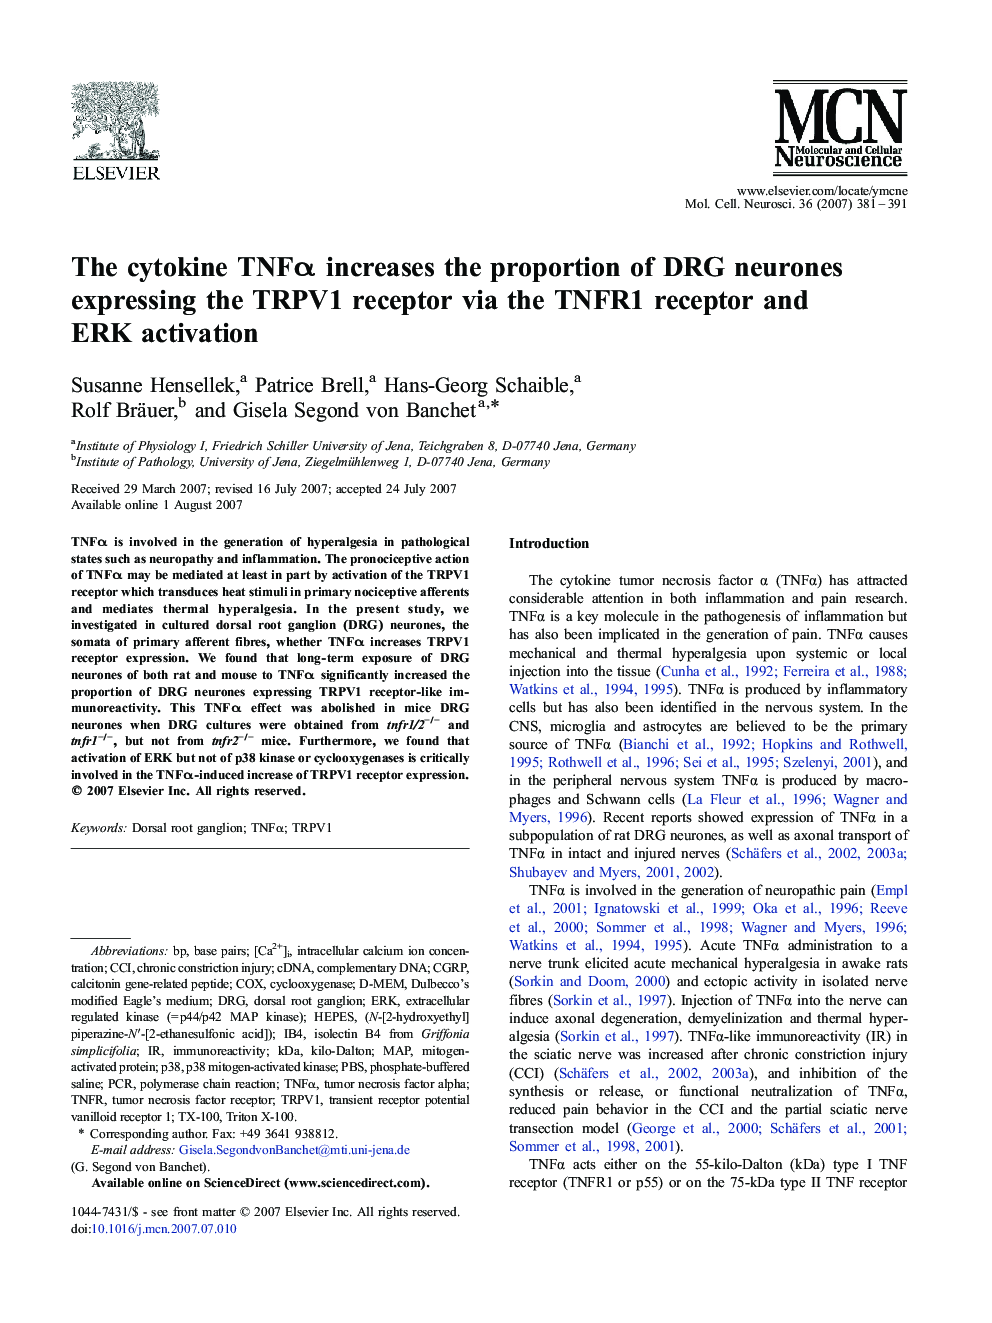 The cytokine TNFα increases the proportion of DRG neurones expressing the TRPV1 receptor via the TNFR1 receptor and ERK activation